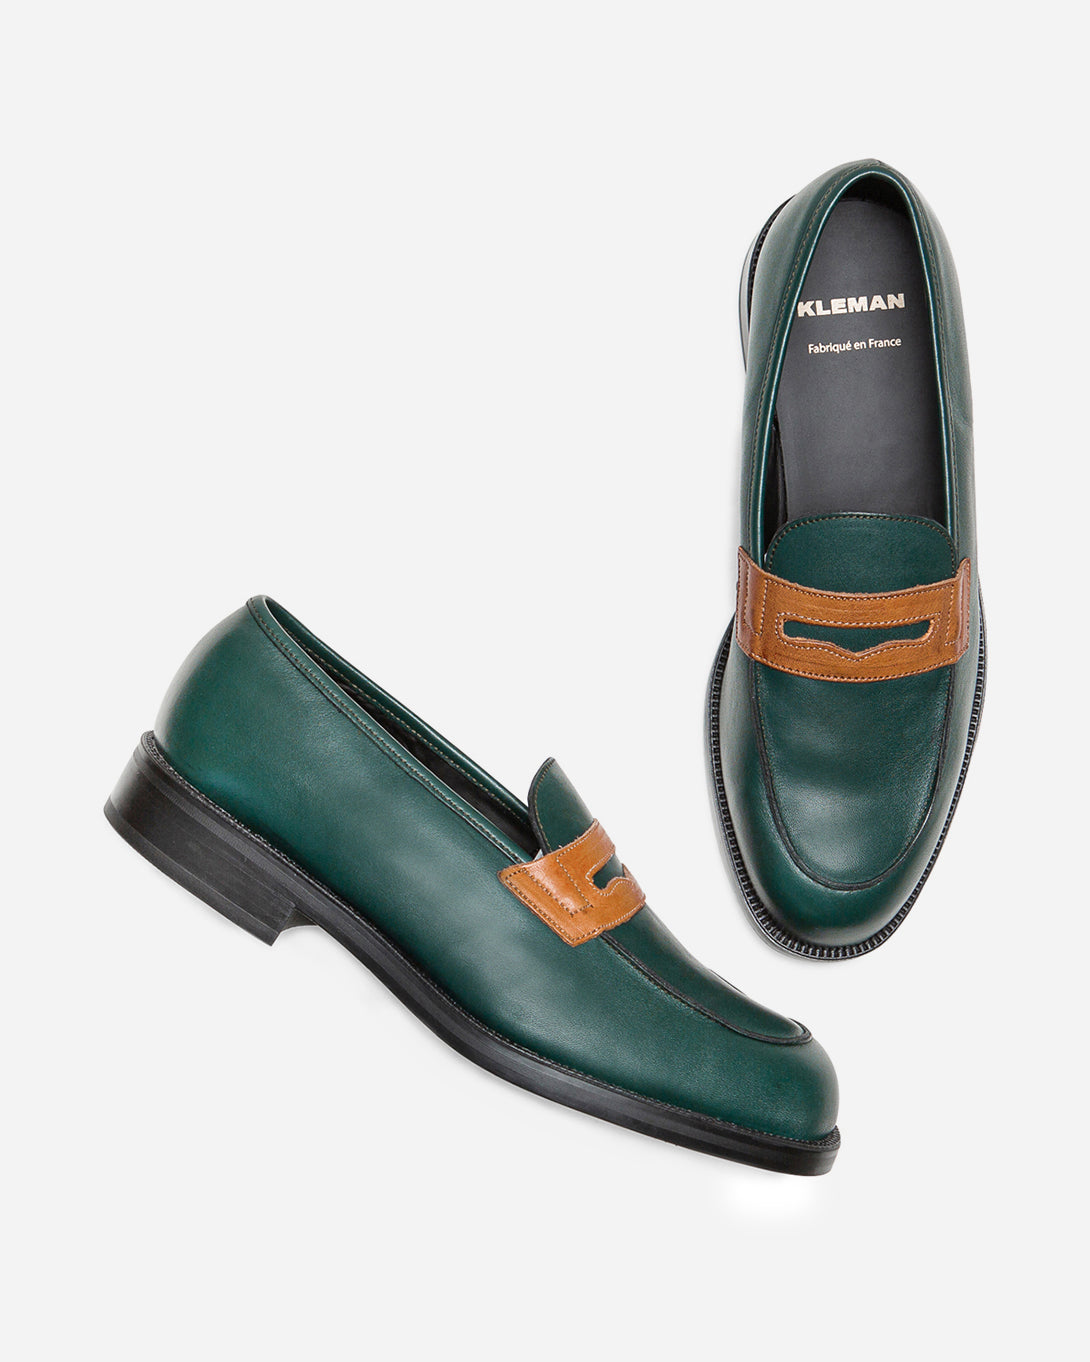 ons mens clothing kleman dalior 2 leather loafers shoes VERT+COGNAC